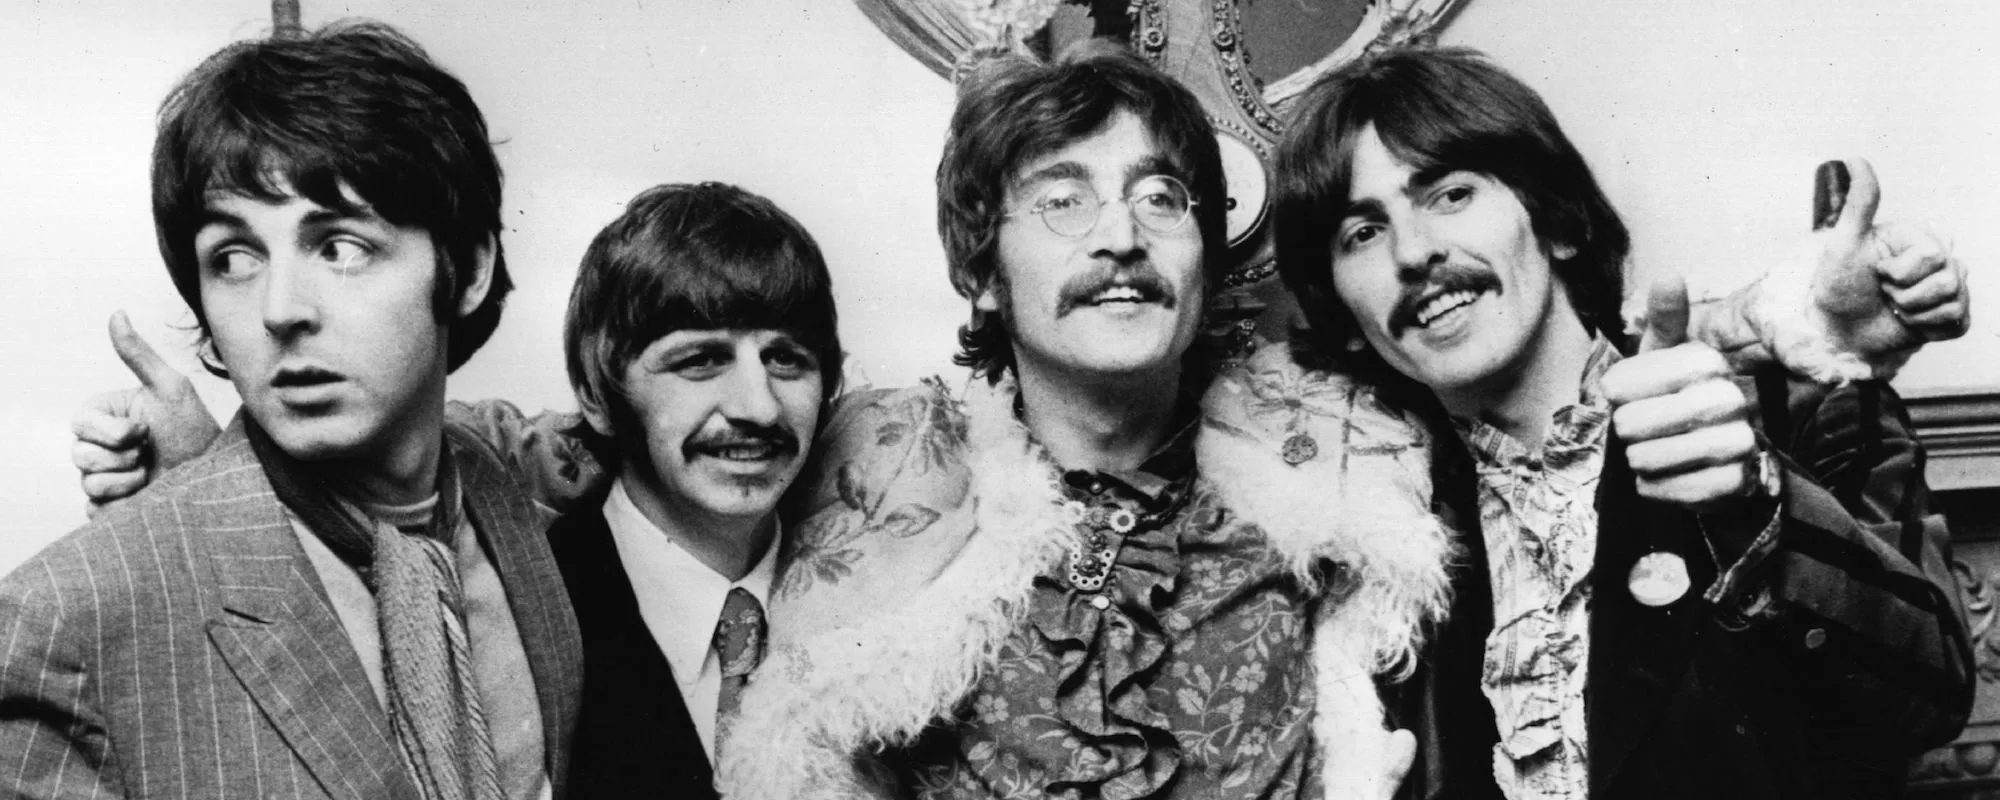 On This Day: The Beatles Went to No. 1 with ‘The White Album’